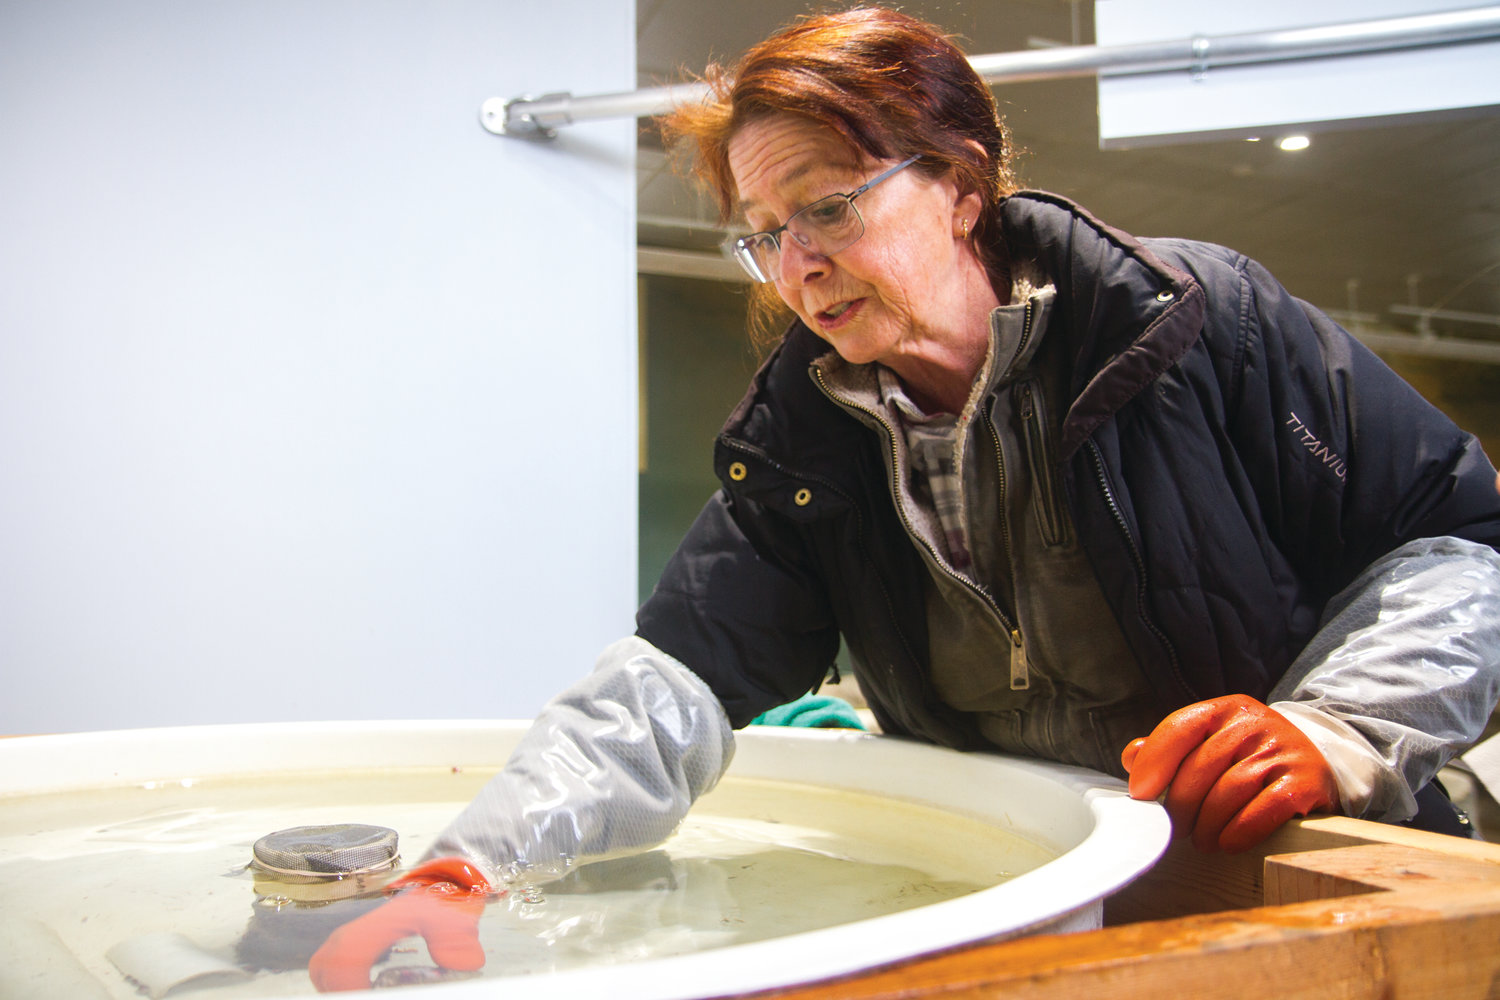 Dana Africa searches for stray abalone in the tank, so transfer to the Puget Sound Restoration Fund for release.